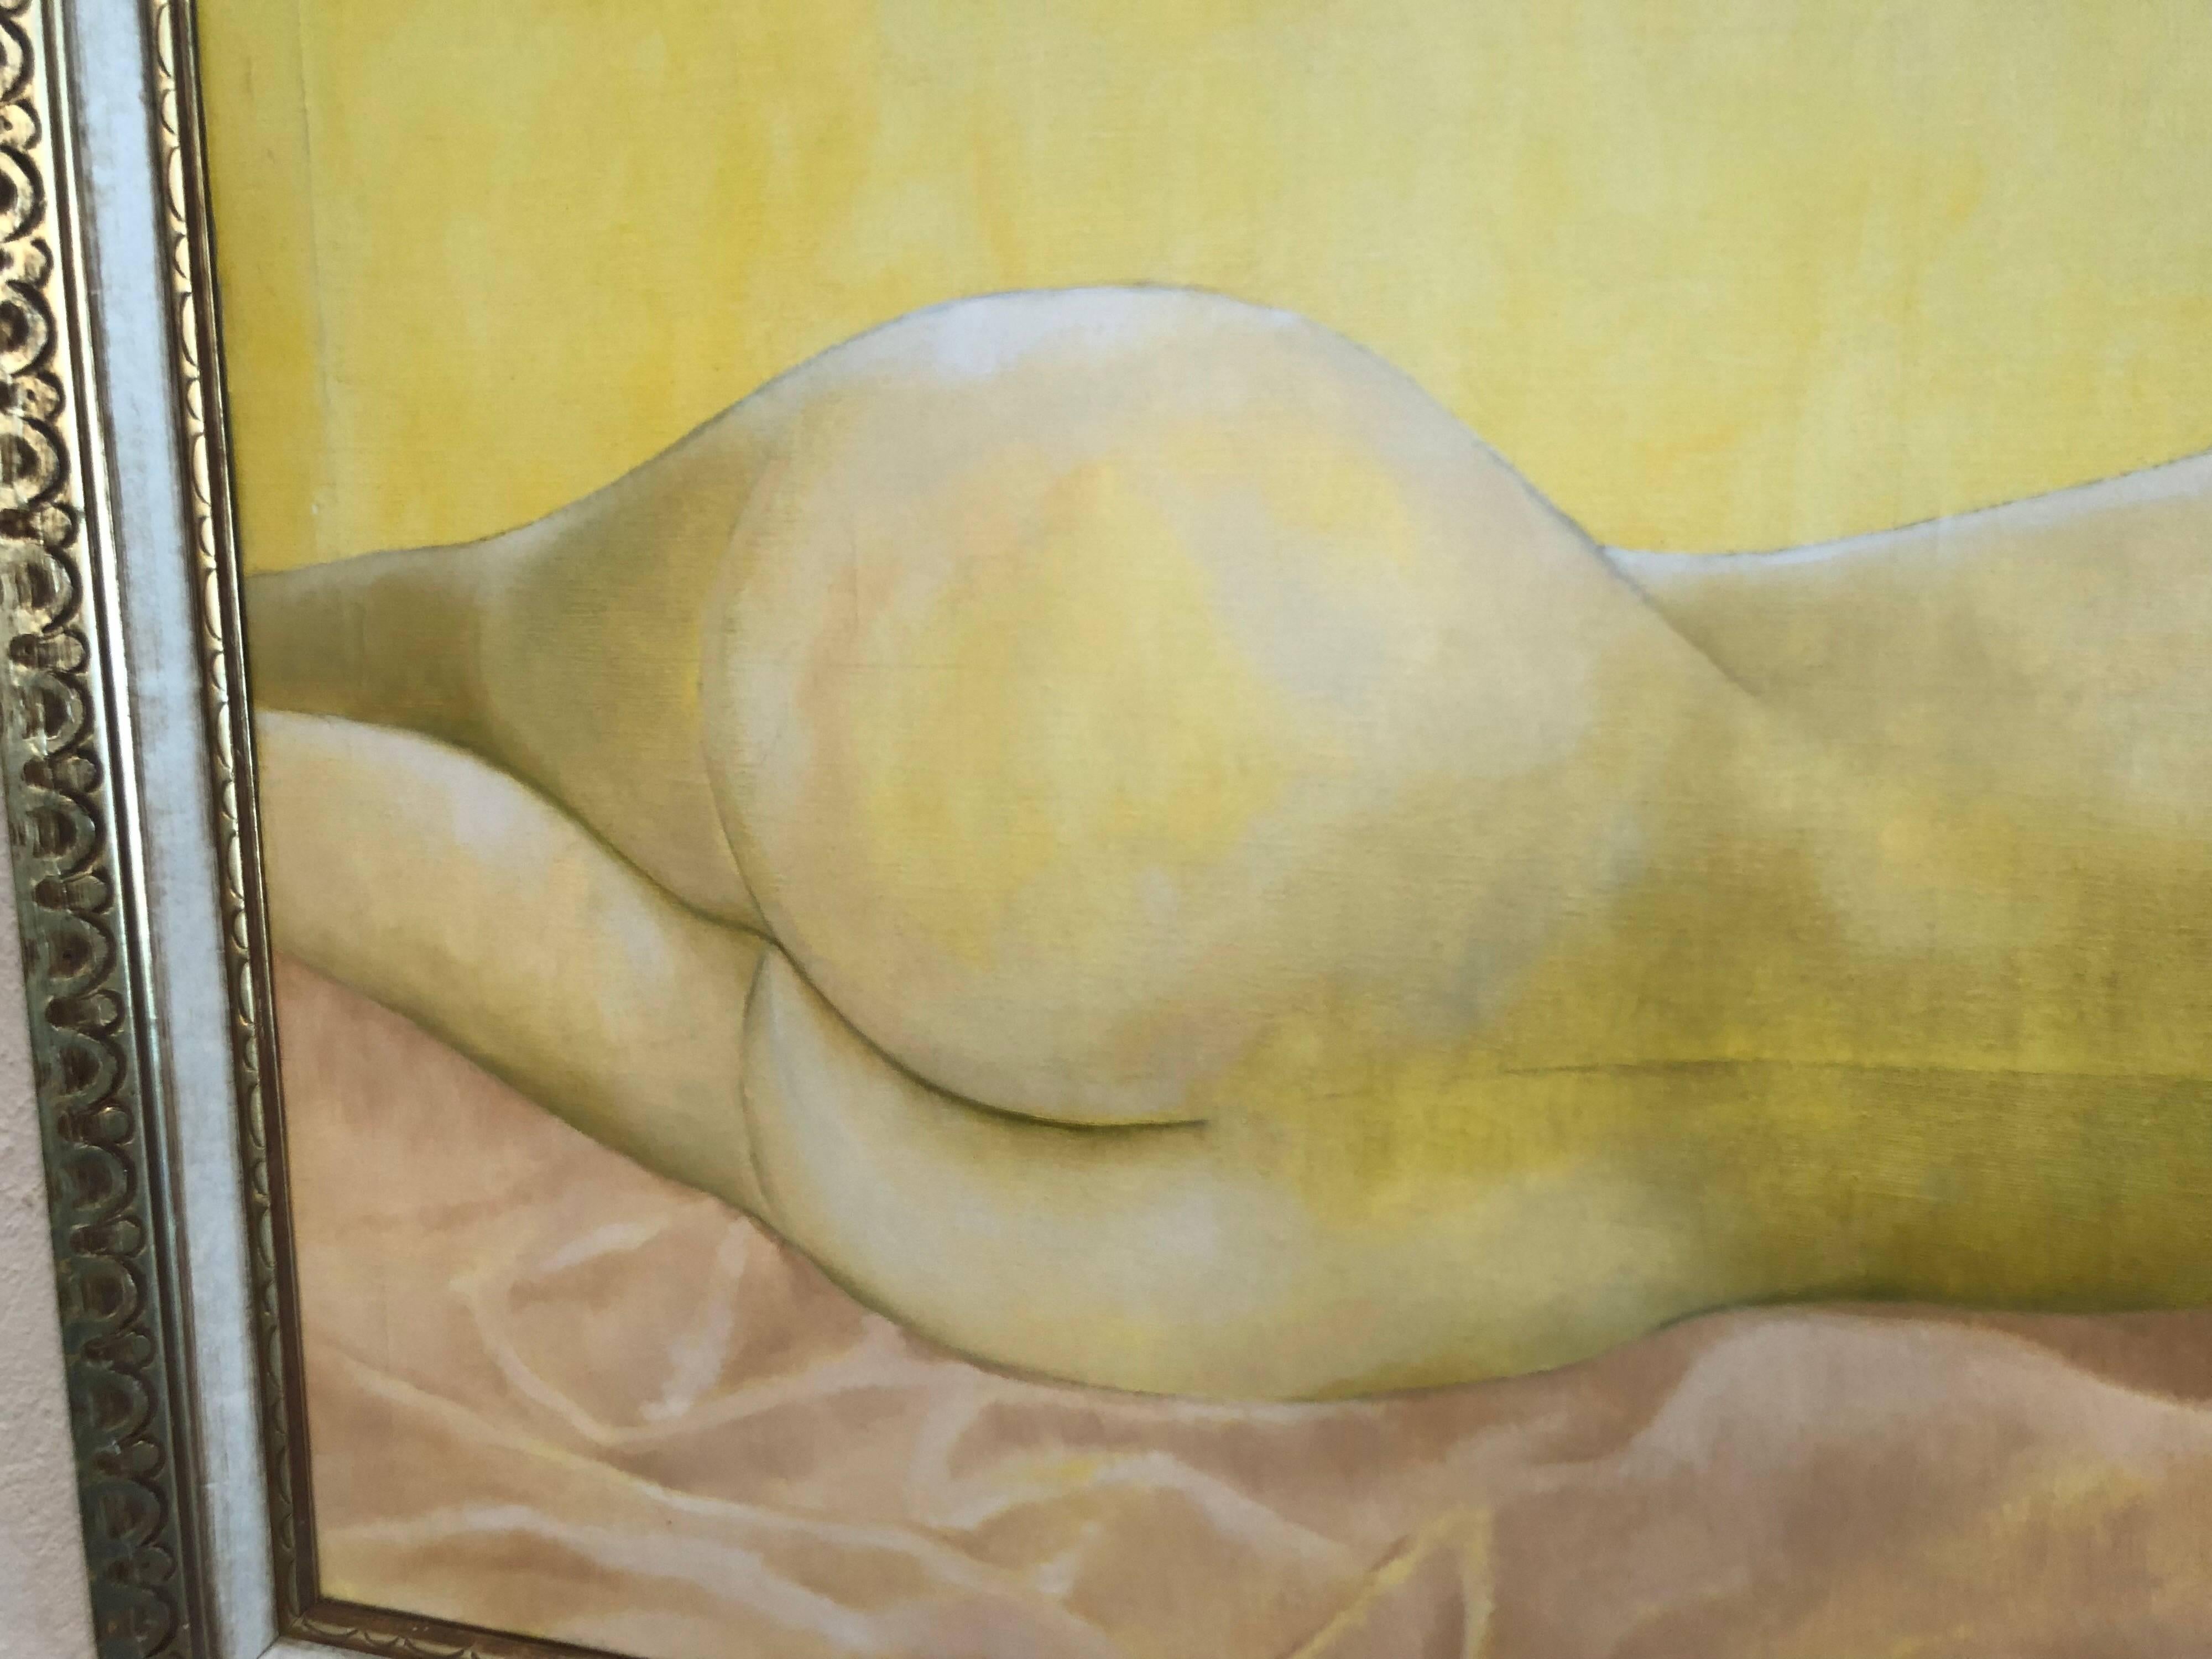 Mid-Century nude oil on canvas from the estate of CT artist Stella Pettersen. Mrs. Pettersen served as a fashion artist on staff of McCall’s magazine and worked as a draftsman for Liberty ships, readying them for World War II with George A. Sharp,